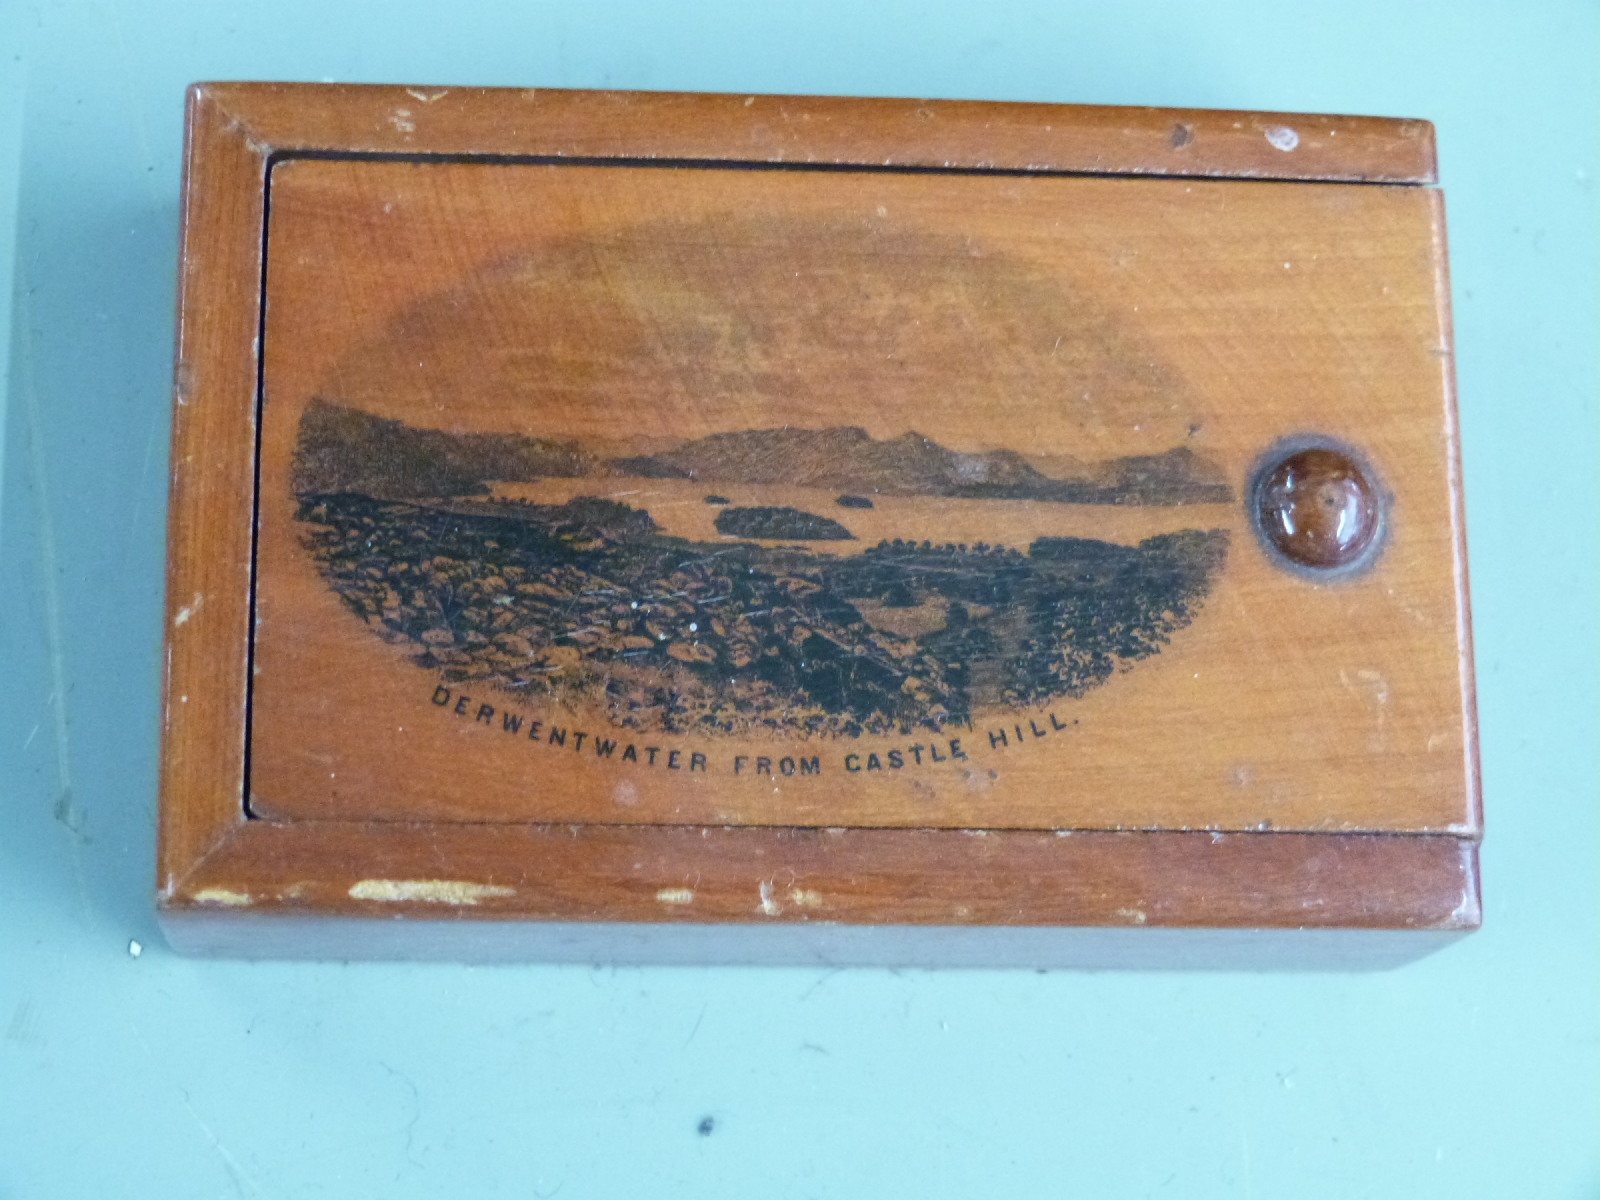 Boxed Christofle bottle opener, boxes including Mauchlinware, Derwentwater, elm box from Waterloo - Image 4 of 4